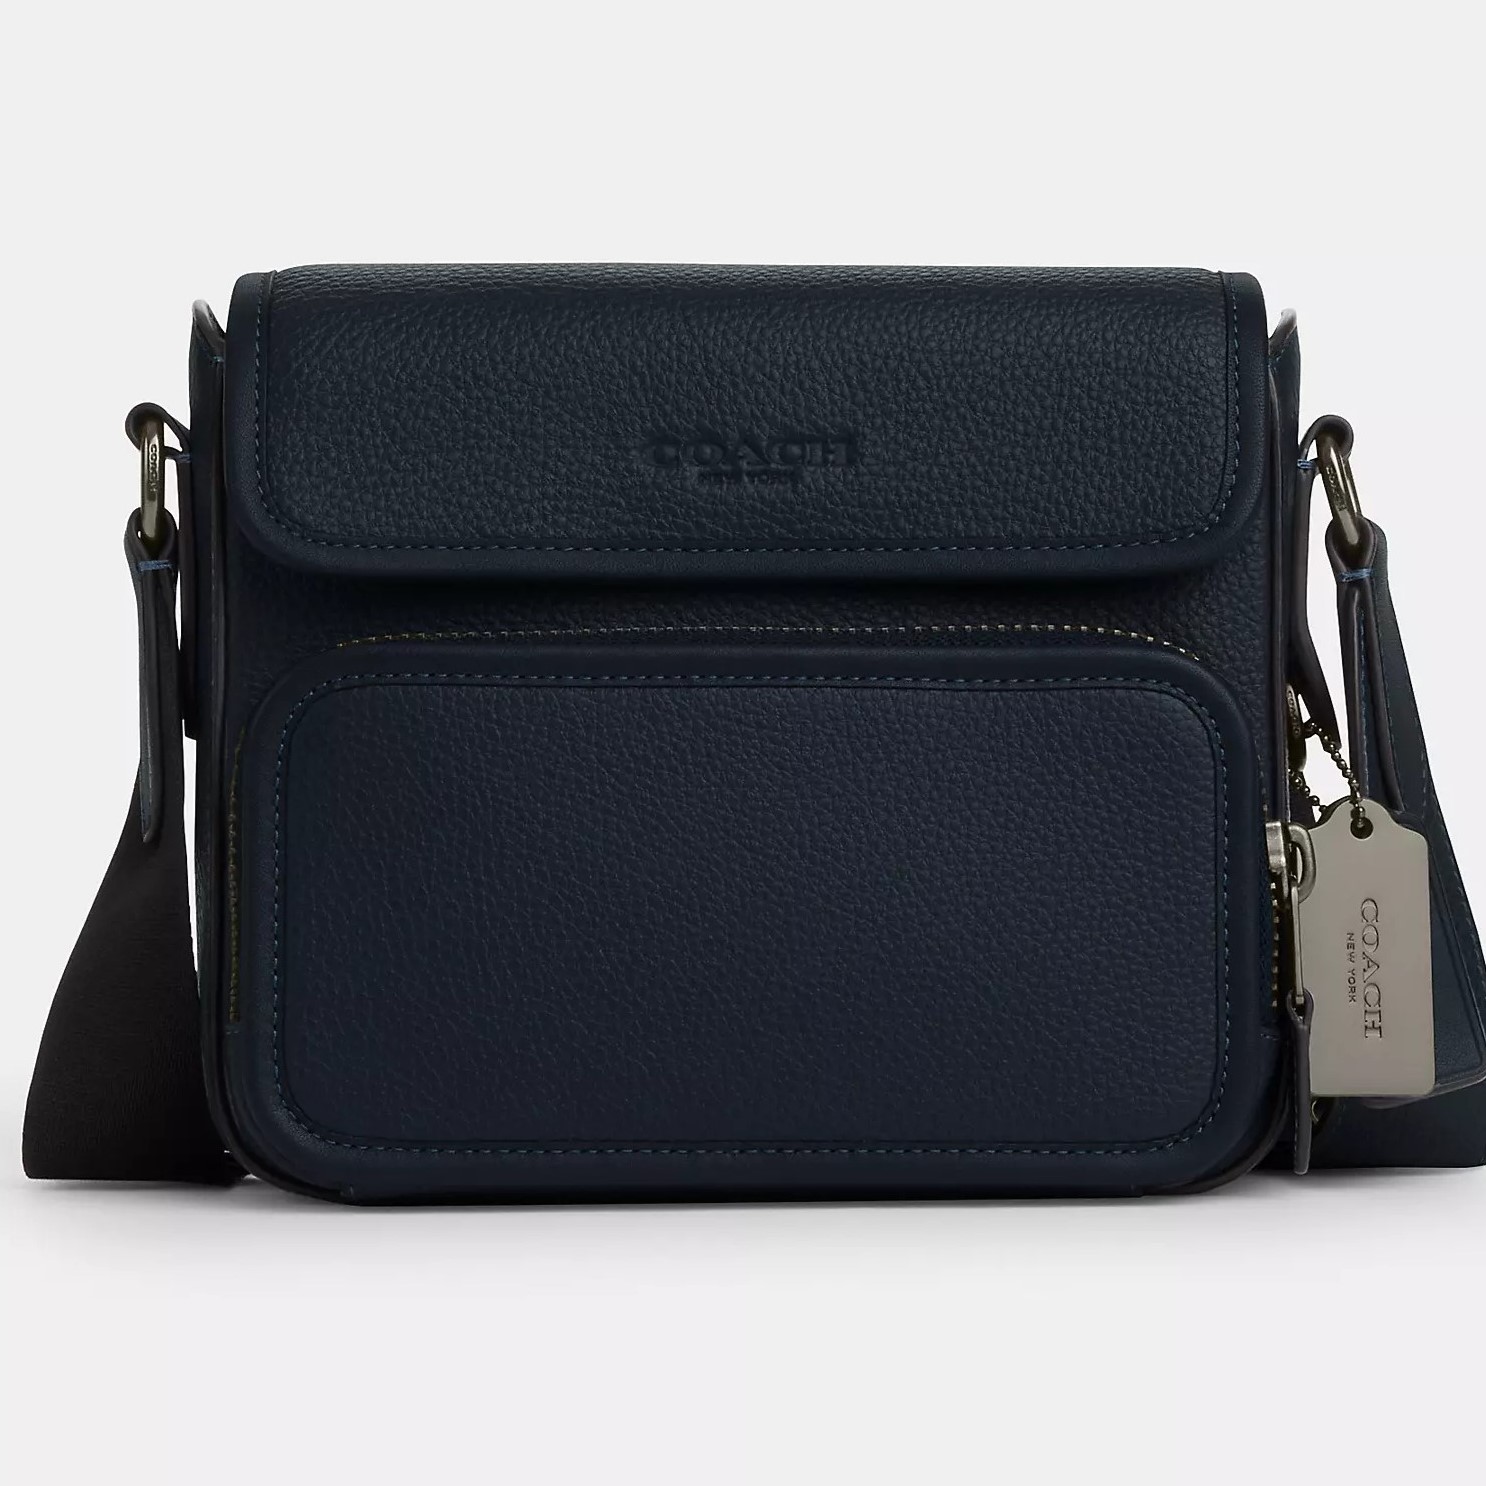 TÚI ĐEO CHÉO COACH NAM SULLIVAN FLAP CROSSBODY IN MIDNIGHT NAVY REFINED PEBBLE LEATHER AND SMOOTH CALF LEATHER CN729 2